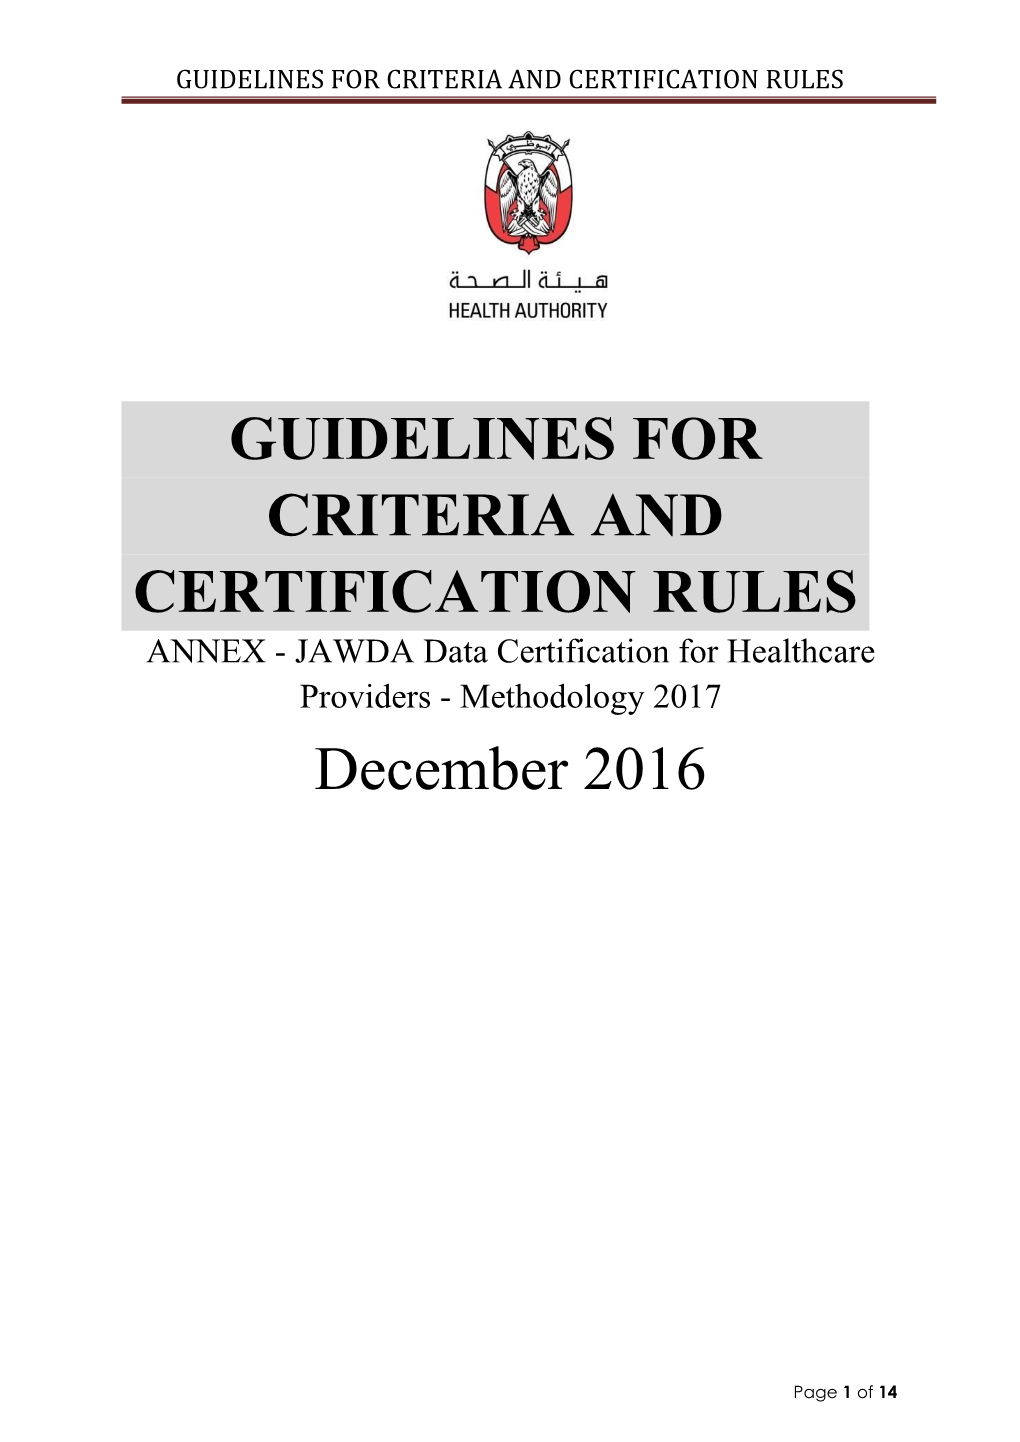 GUIDELINES for CRITERIA and CERTIFICATION RULES December